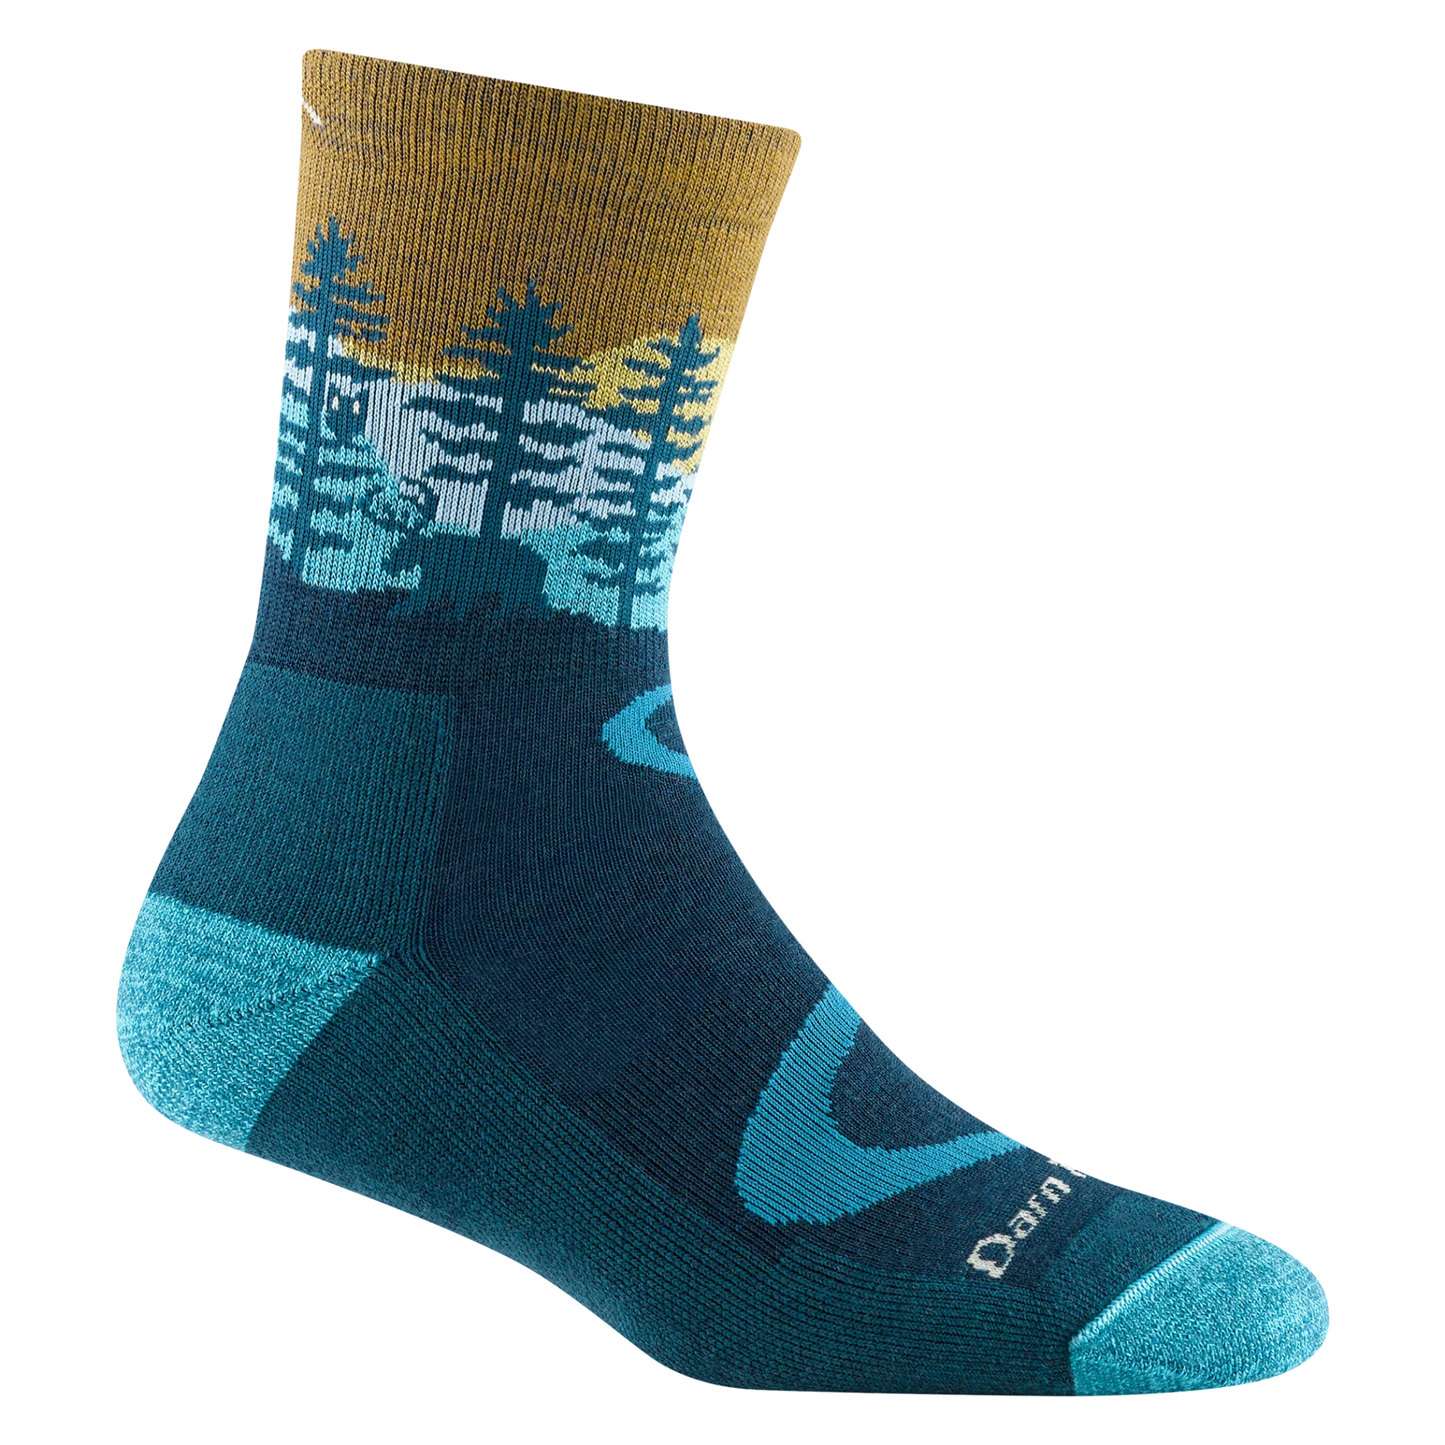 Darn Tough - 5013 Women's Hiker Northwoods Micro Crew Sock Midweight with Cushion